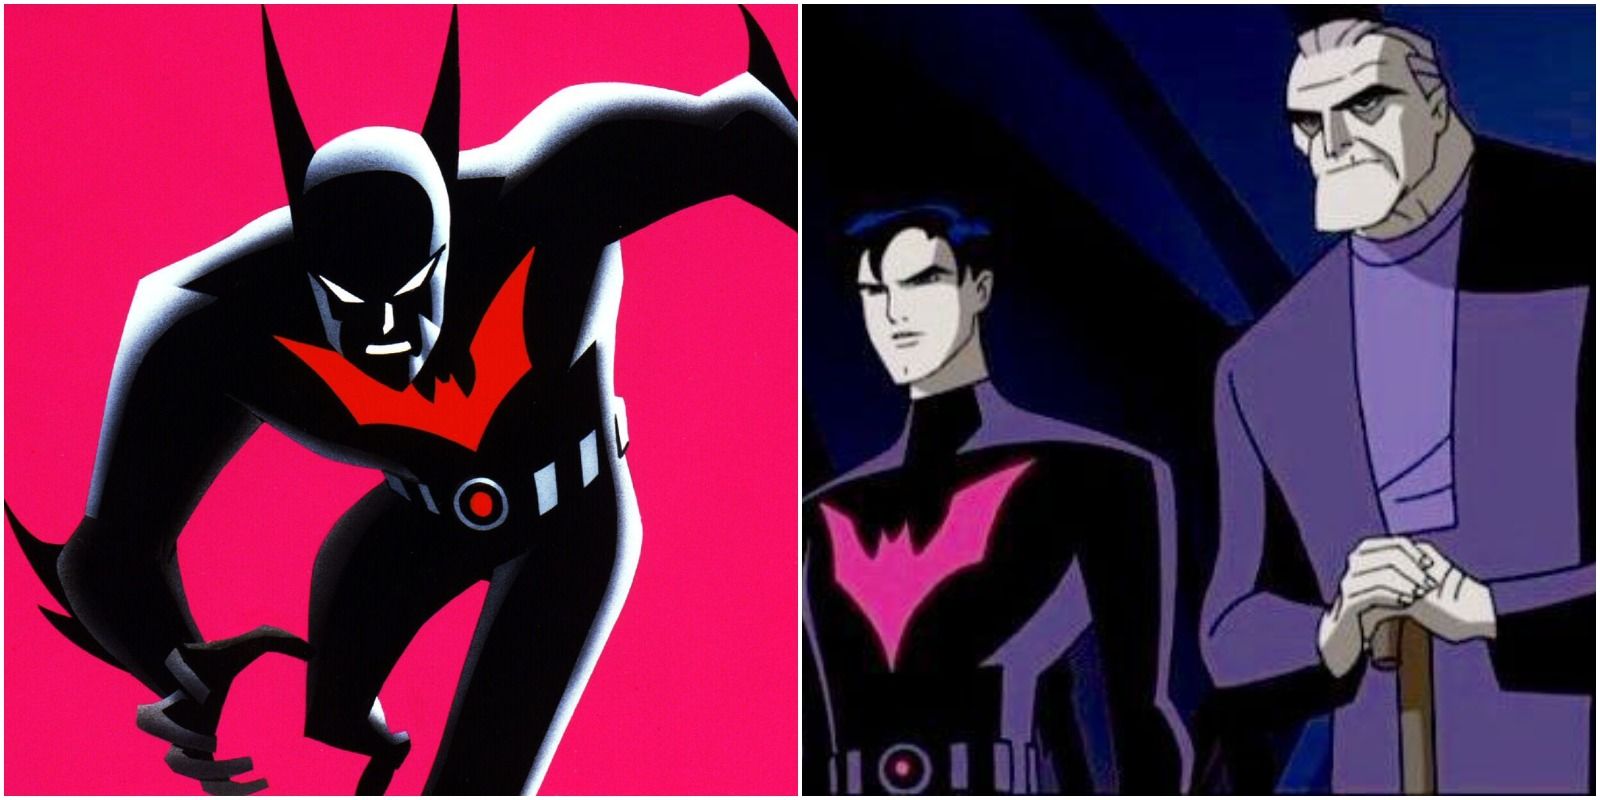 Batman Beyond and a still from the show featuring Terry McGinnis as Batman and Bruce Wayne